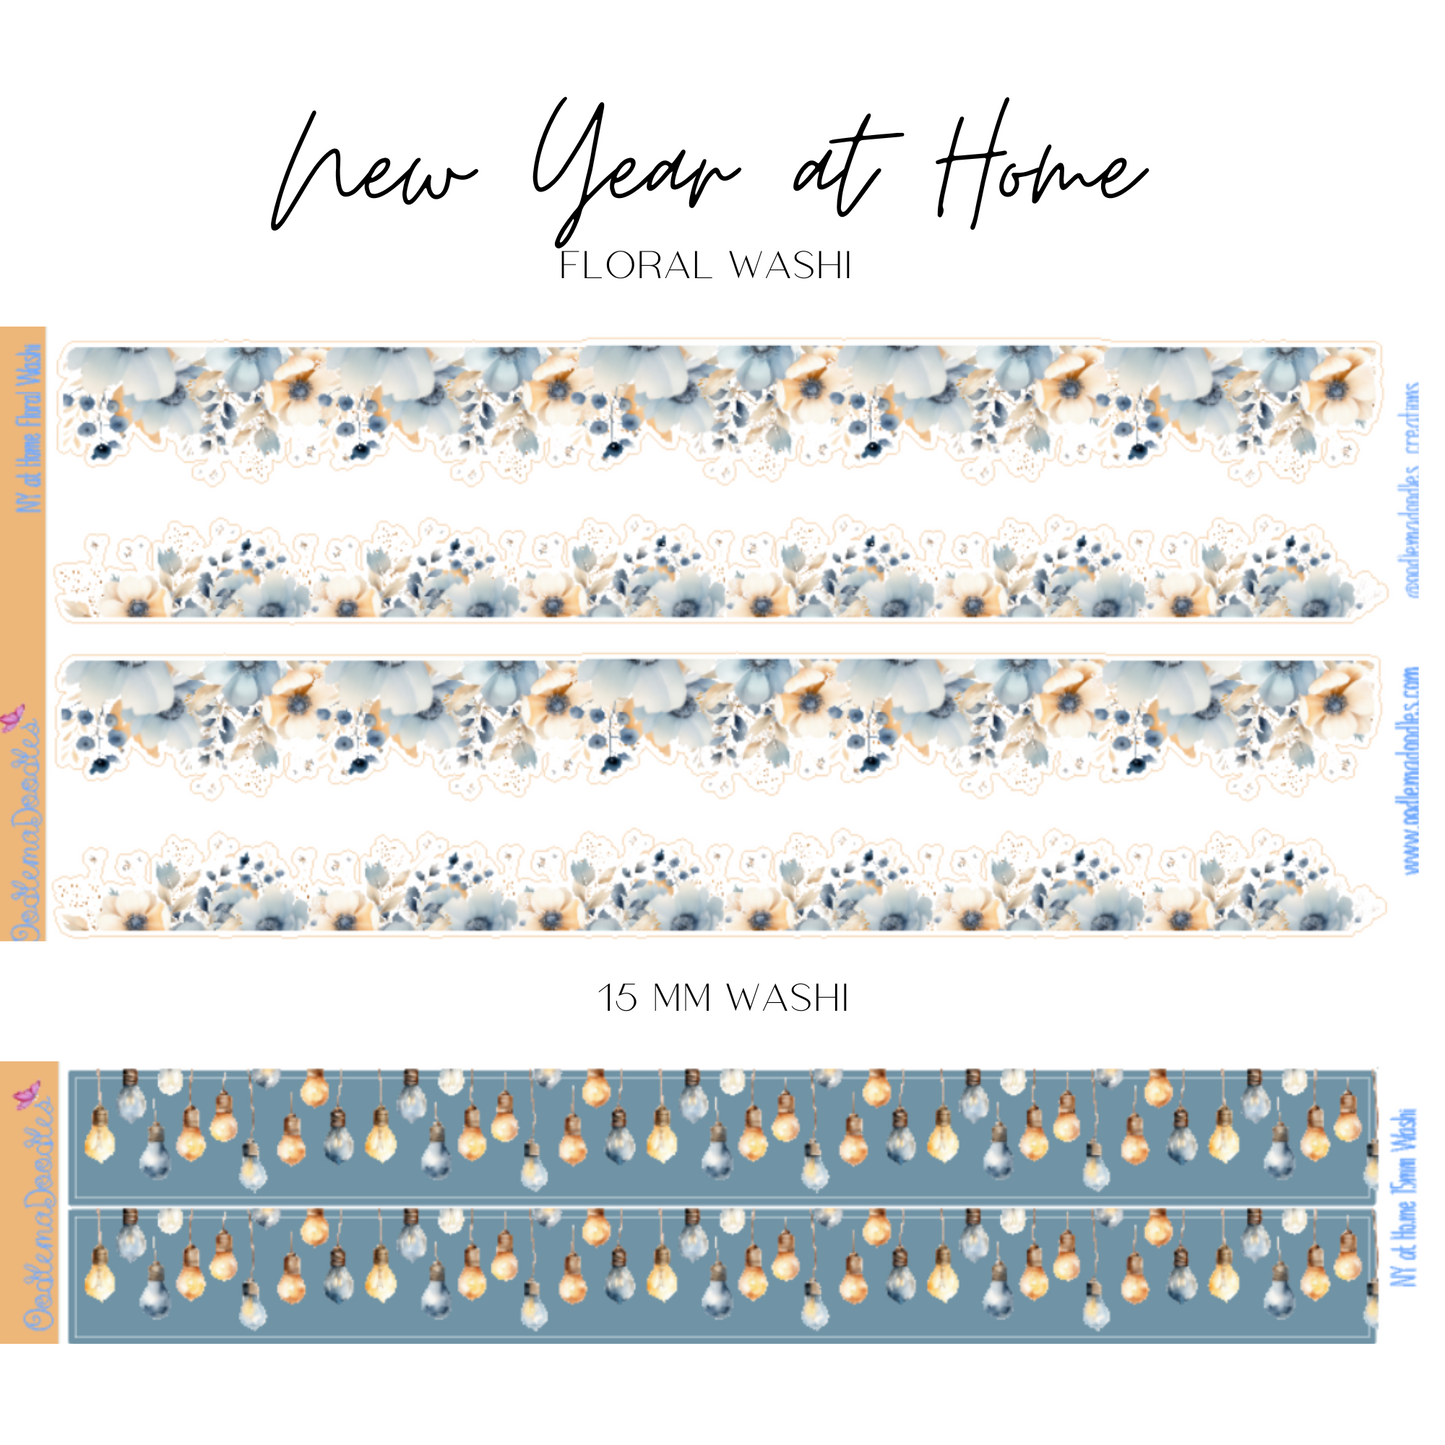 New Year at Home Addon & Extra Washi Options